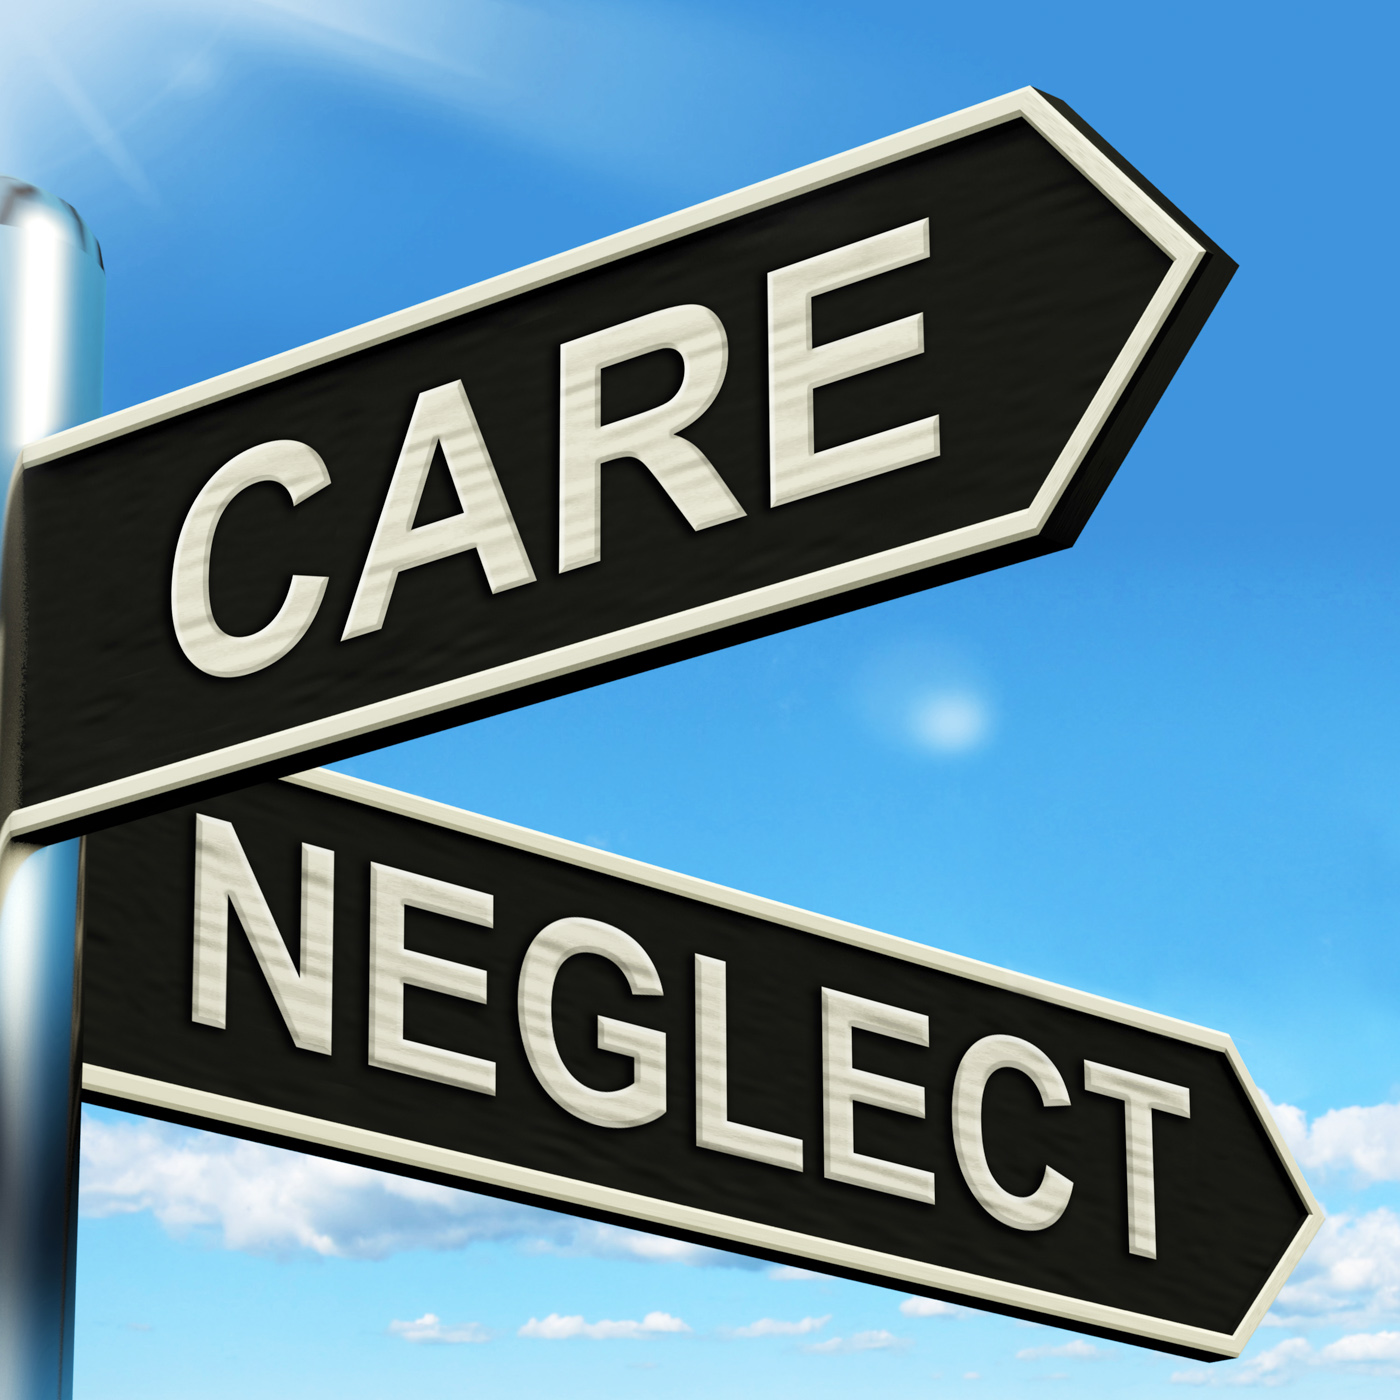 Care neglect signpost shows caring or negligent photo